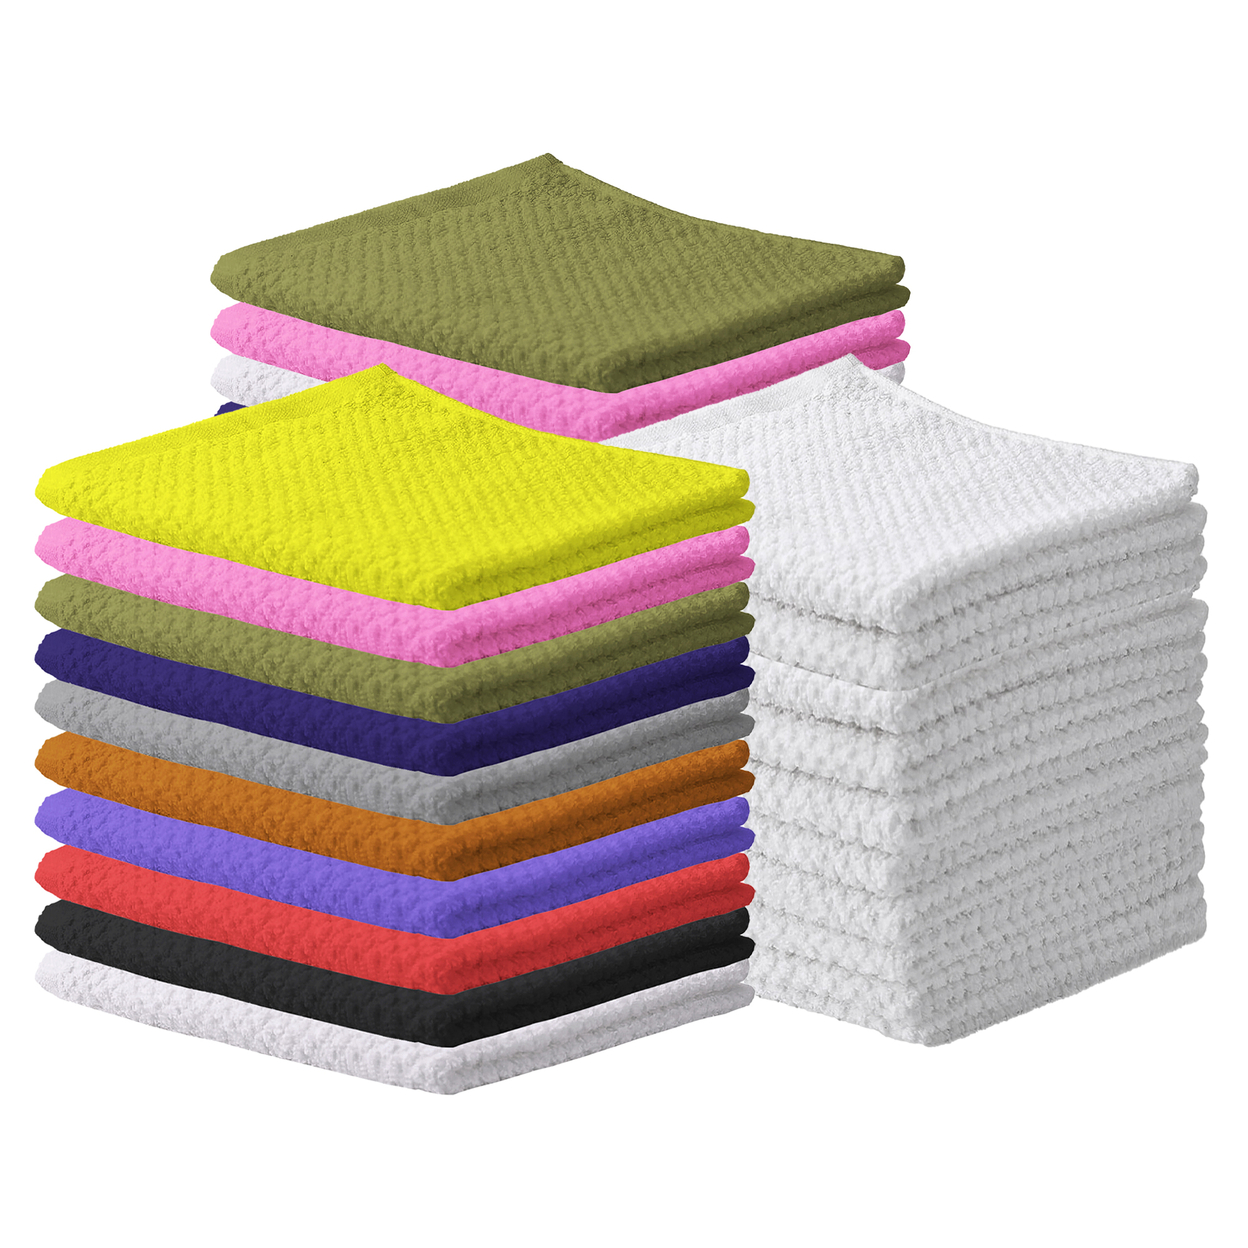 10-Pack: Multipurpose Super Absorbent Ultra Soft 100% Cotton Ring Spun Stitched Wash Cloths